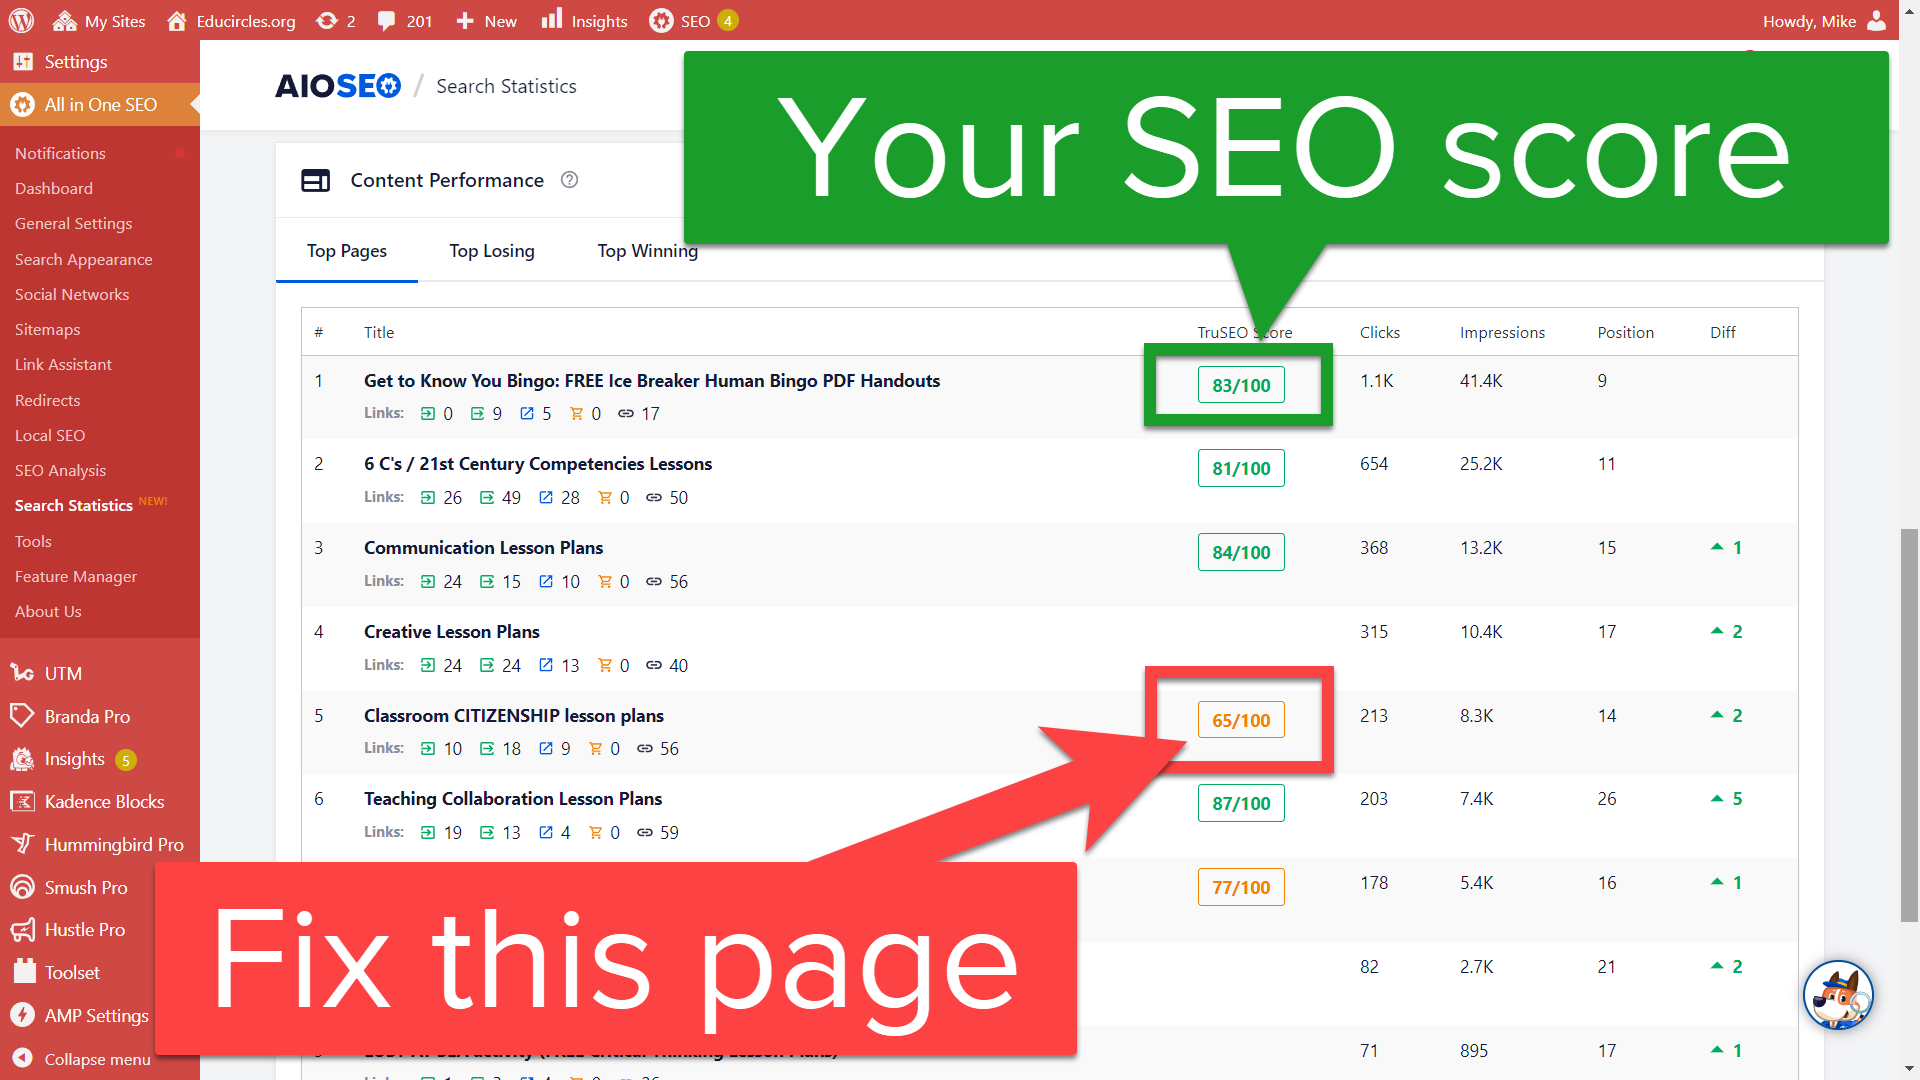 AIOSEO tells you your SEO score and combines with Google Search Console Data. Fix the page in red (with the low TruSEO score)